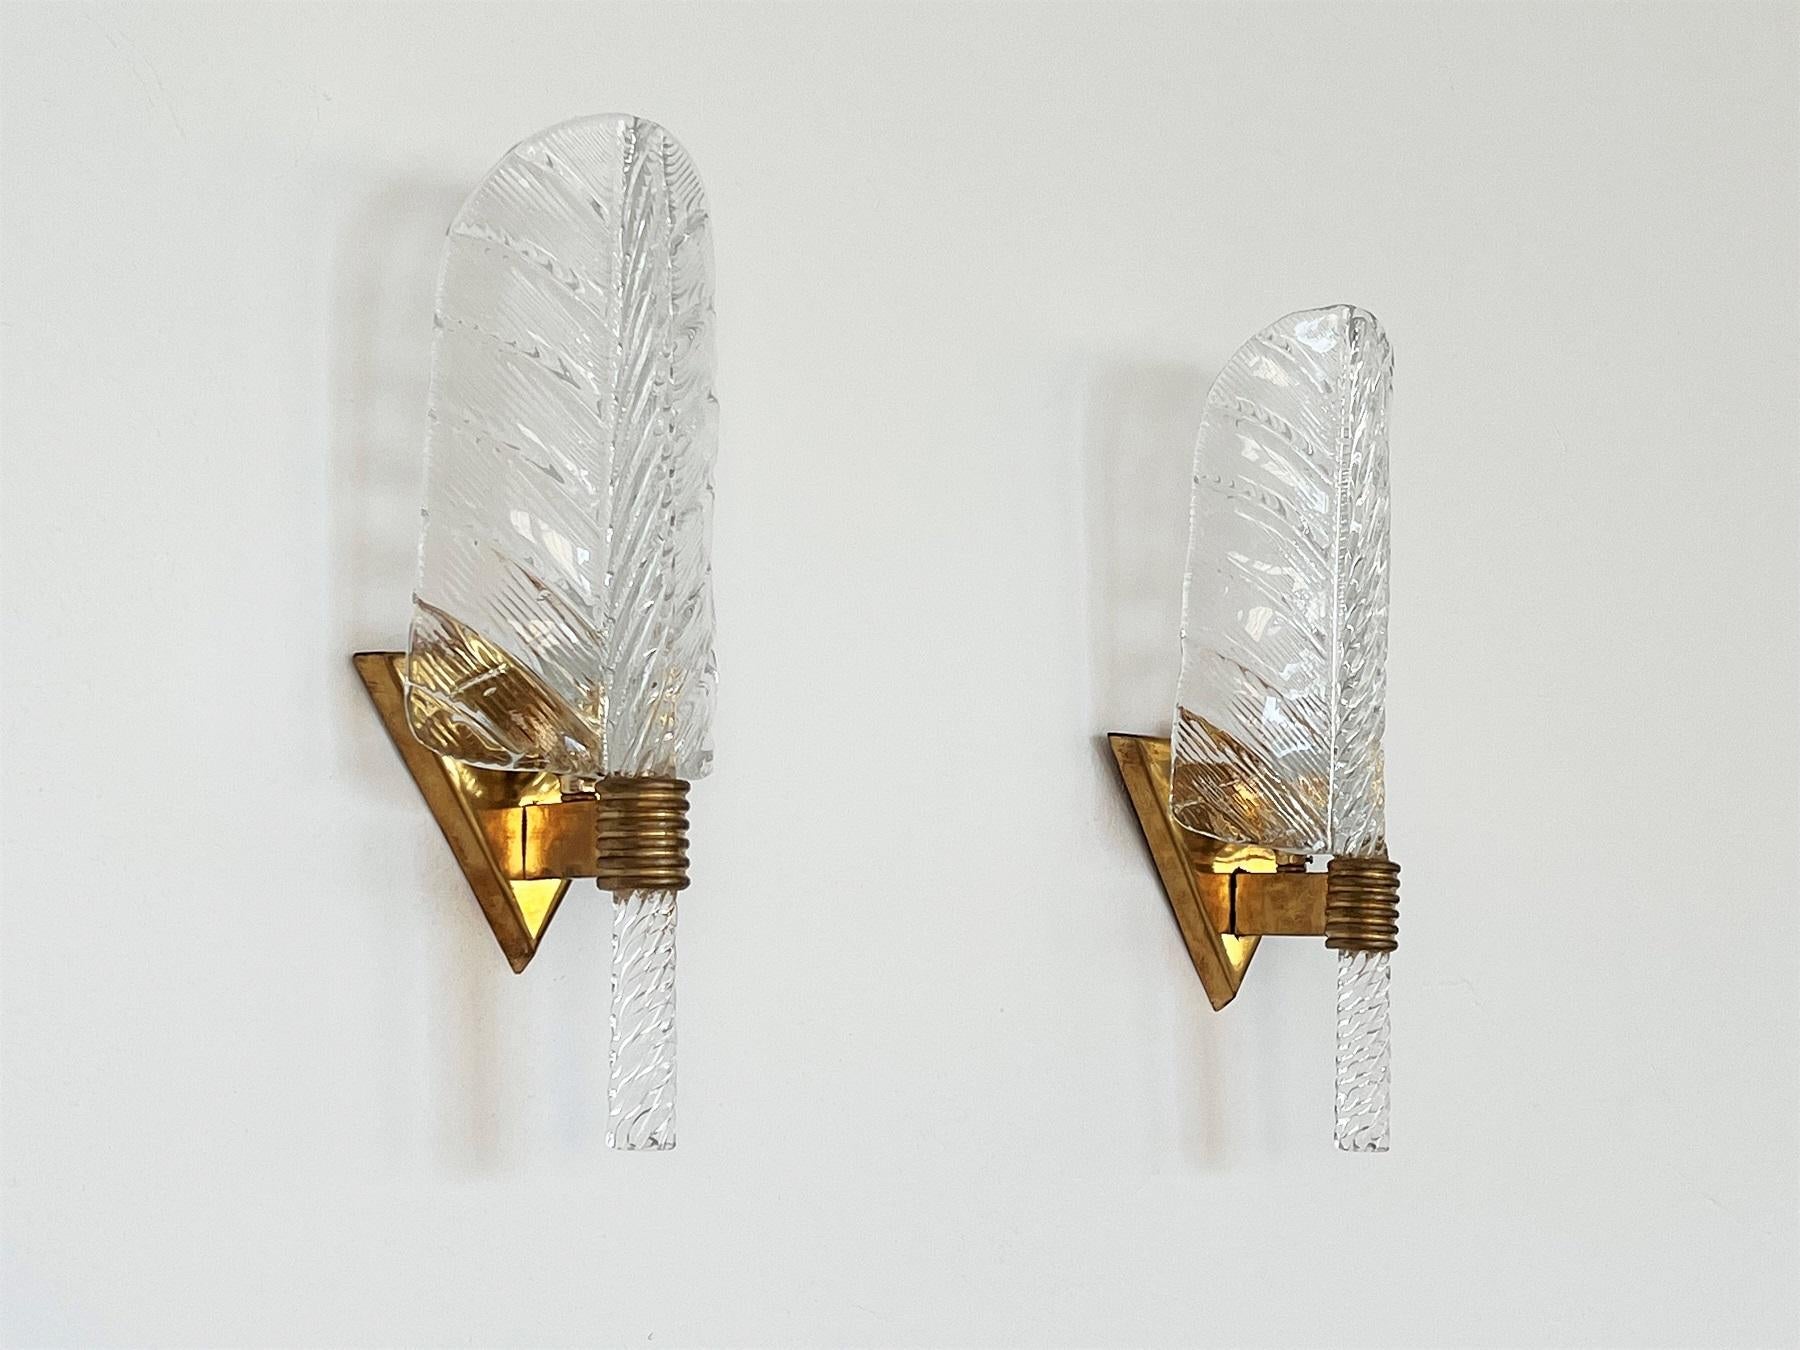 Hand-Crafted Italian Brass and Murano Glass Leaves Wall Lights in Barovier Toso Style, 1990s For Sale